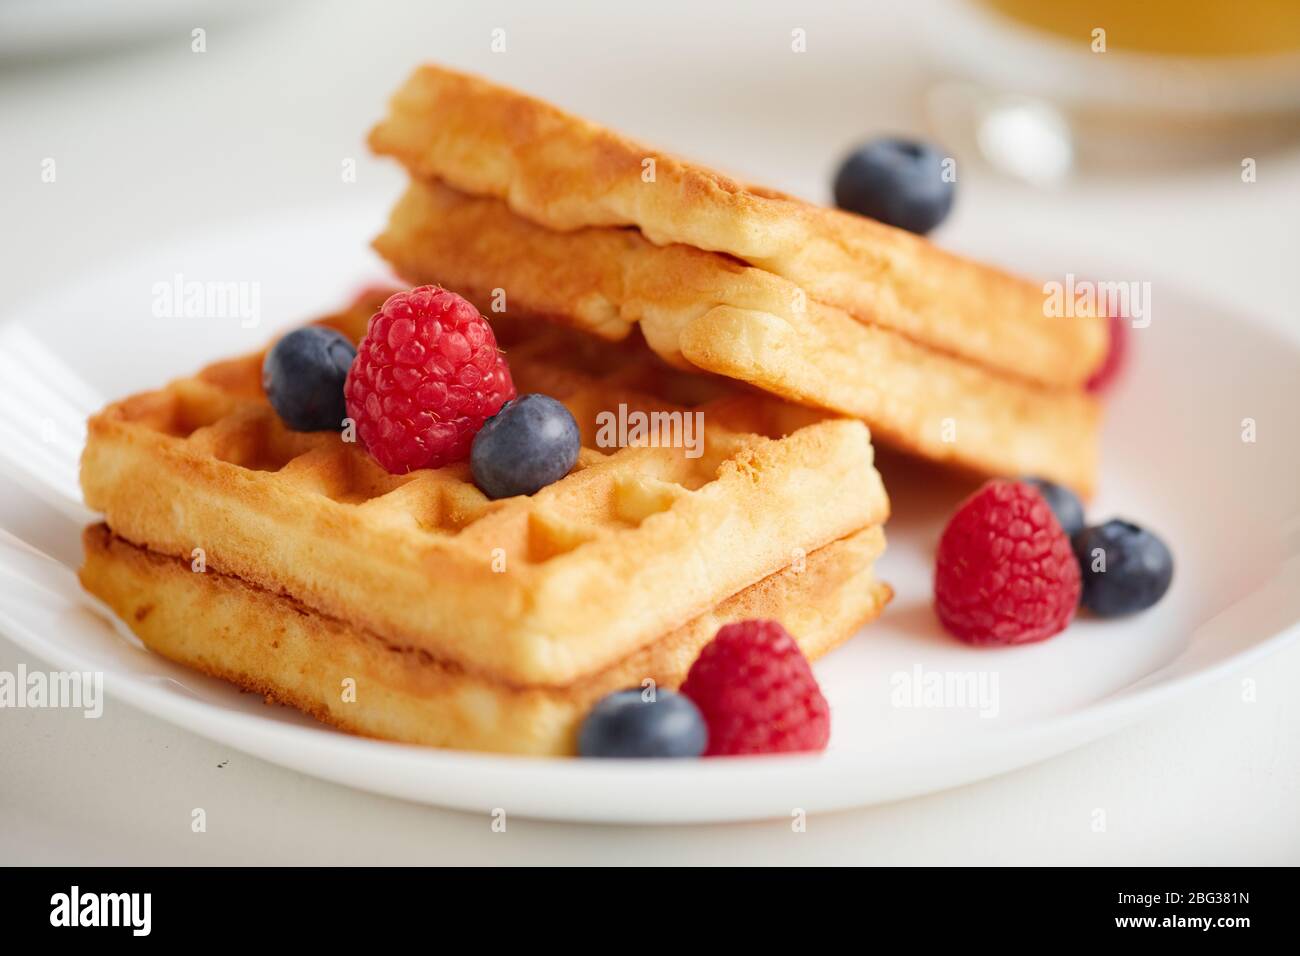 Minimal composition of sweet dessert waffles with berry topping laid over white plate on cafe table, copy space Stock Photo